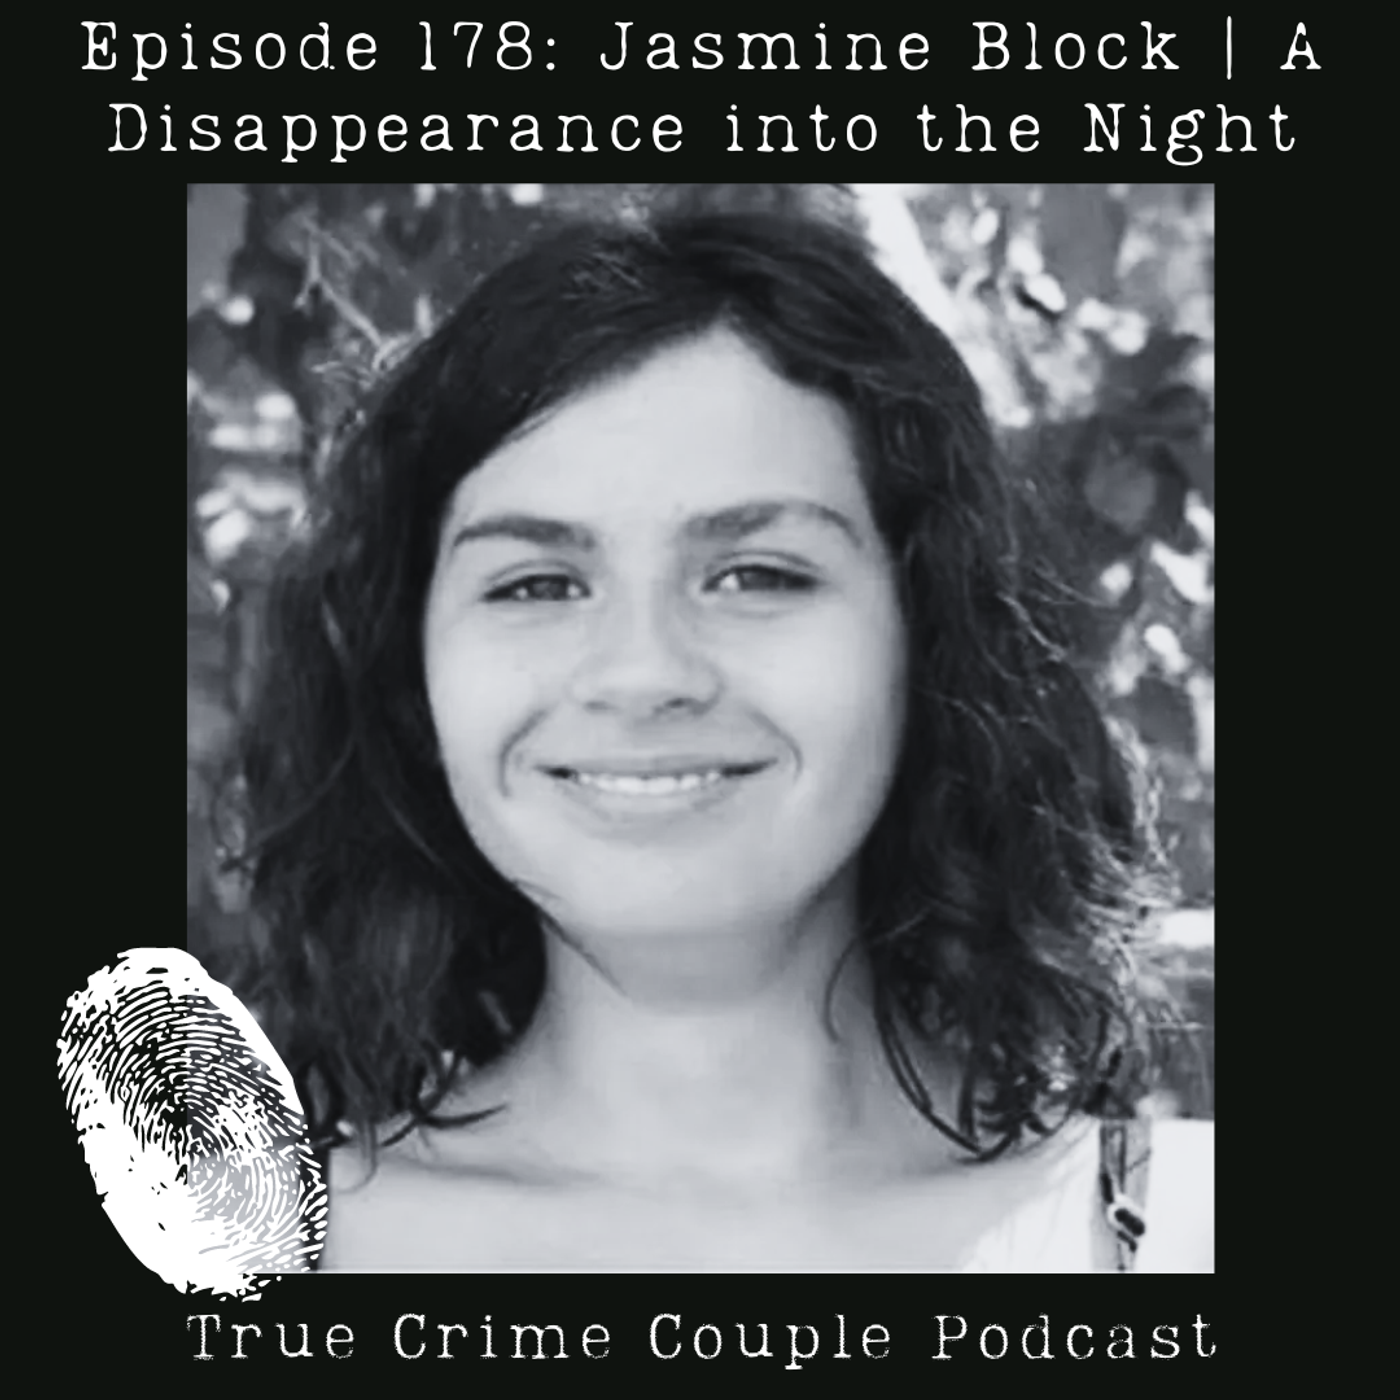 Episode 178: Jasmine Block | A Disappearance into the Night